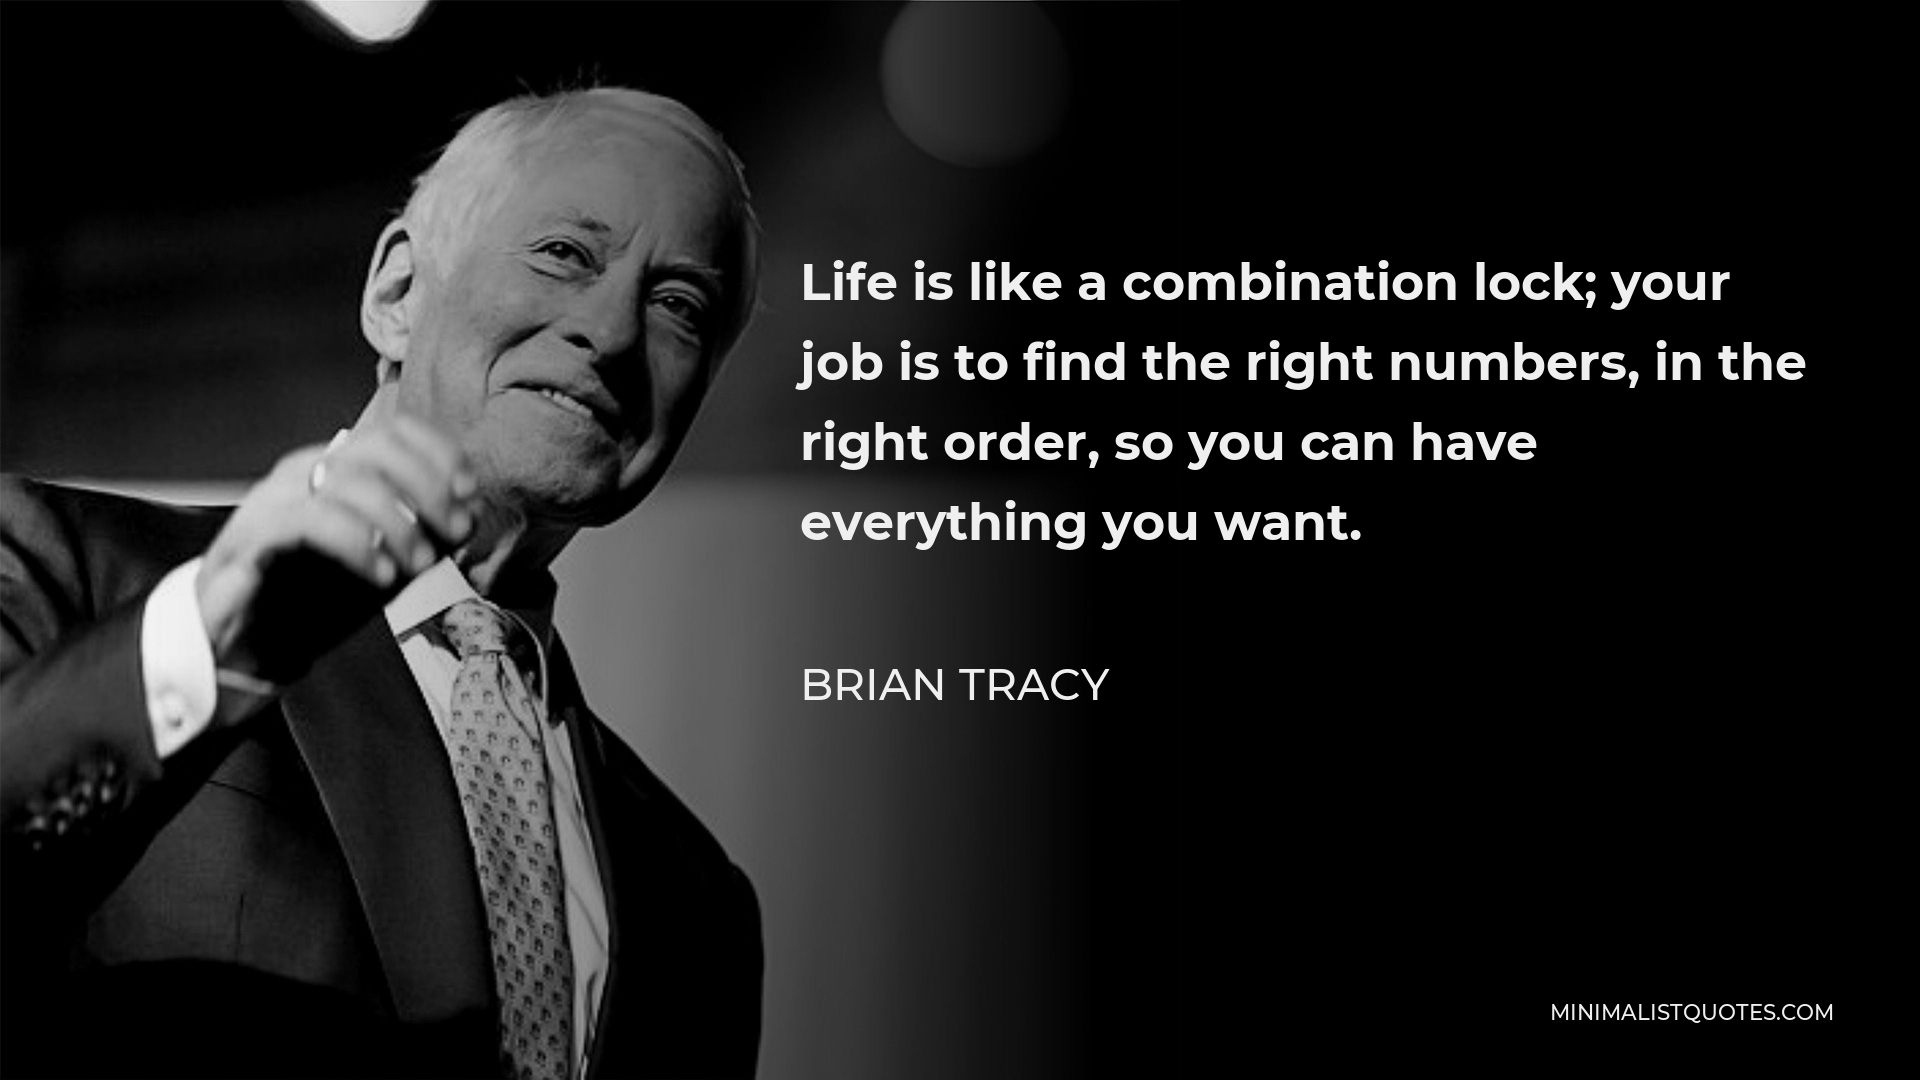 Brian Tracy Quote - Life is like a combination lock; your job is to find the right numbers, in the right order, so you can have everything you want.